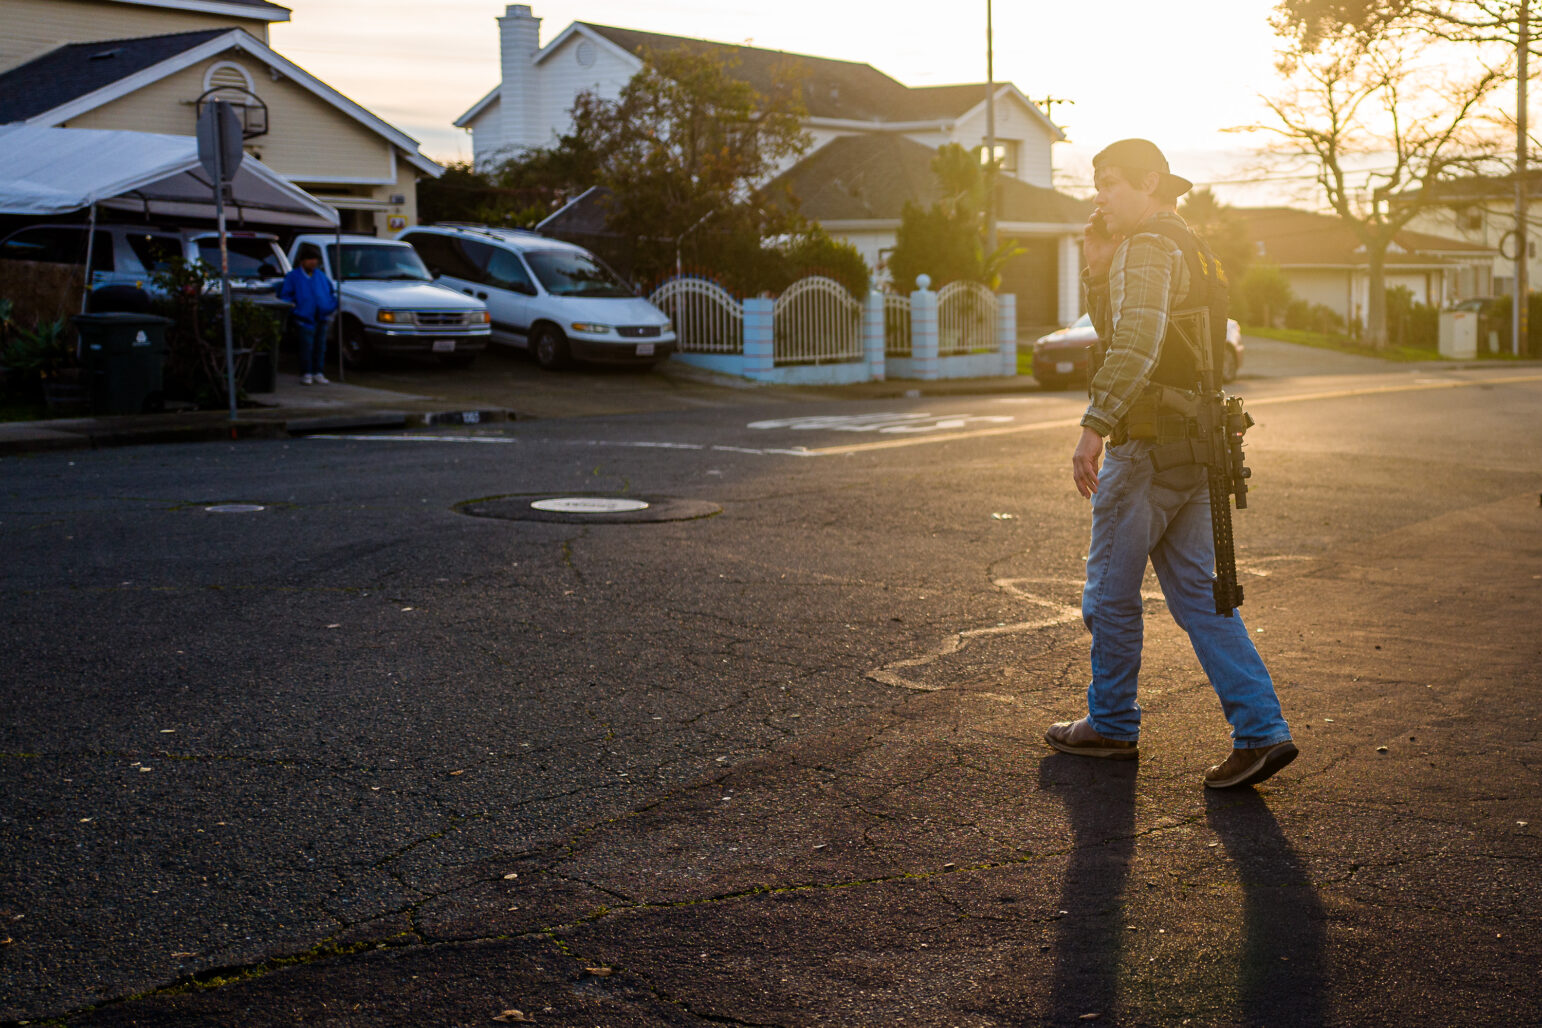 A sheriff's deputy in plainclothes with an AR-15 style rifle speaks on a cell phone at sunset.